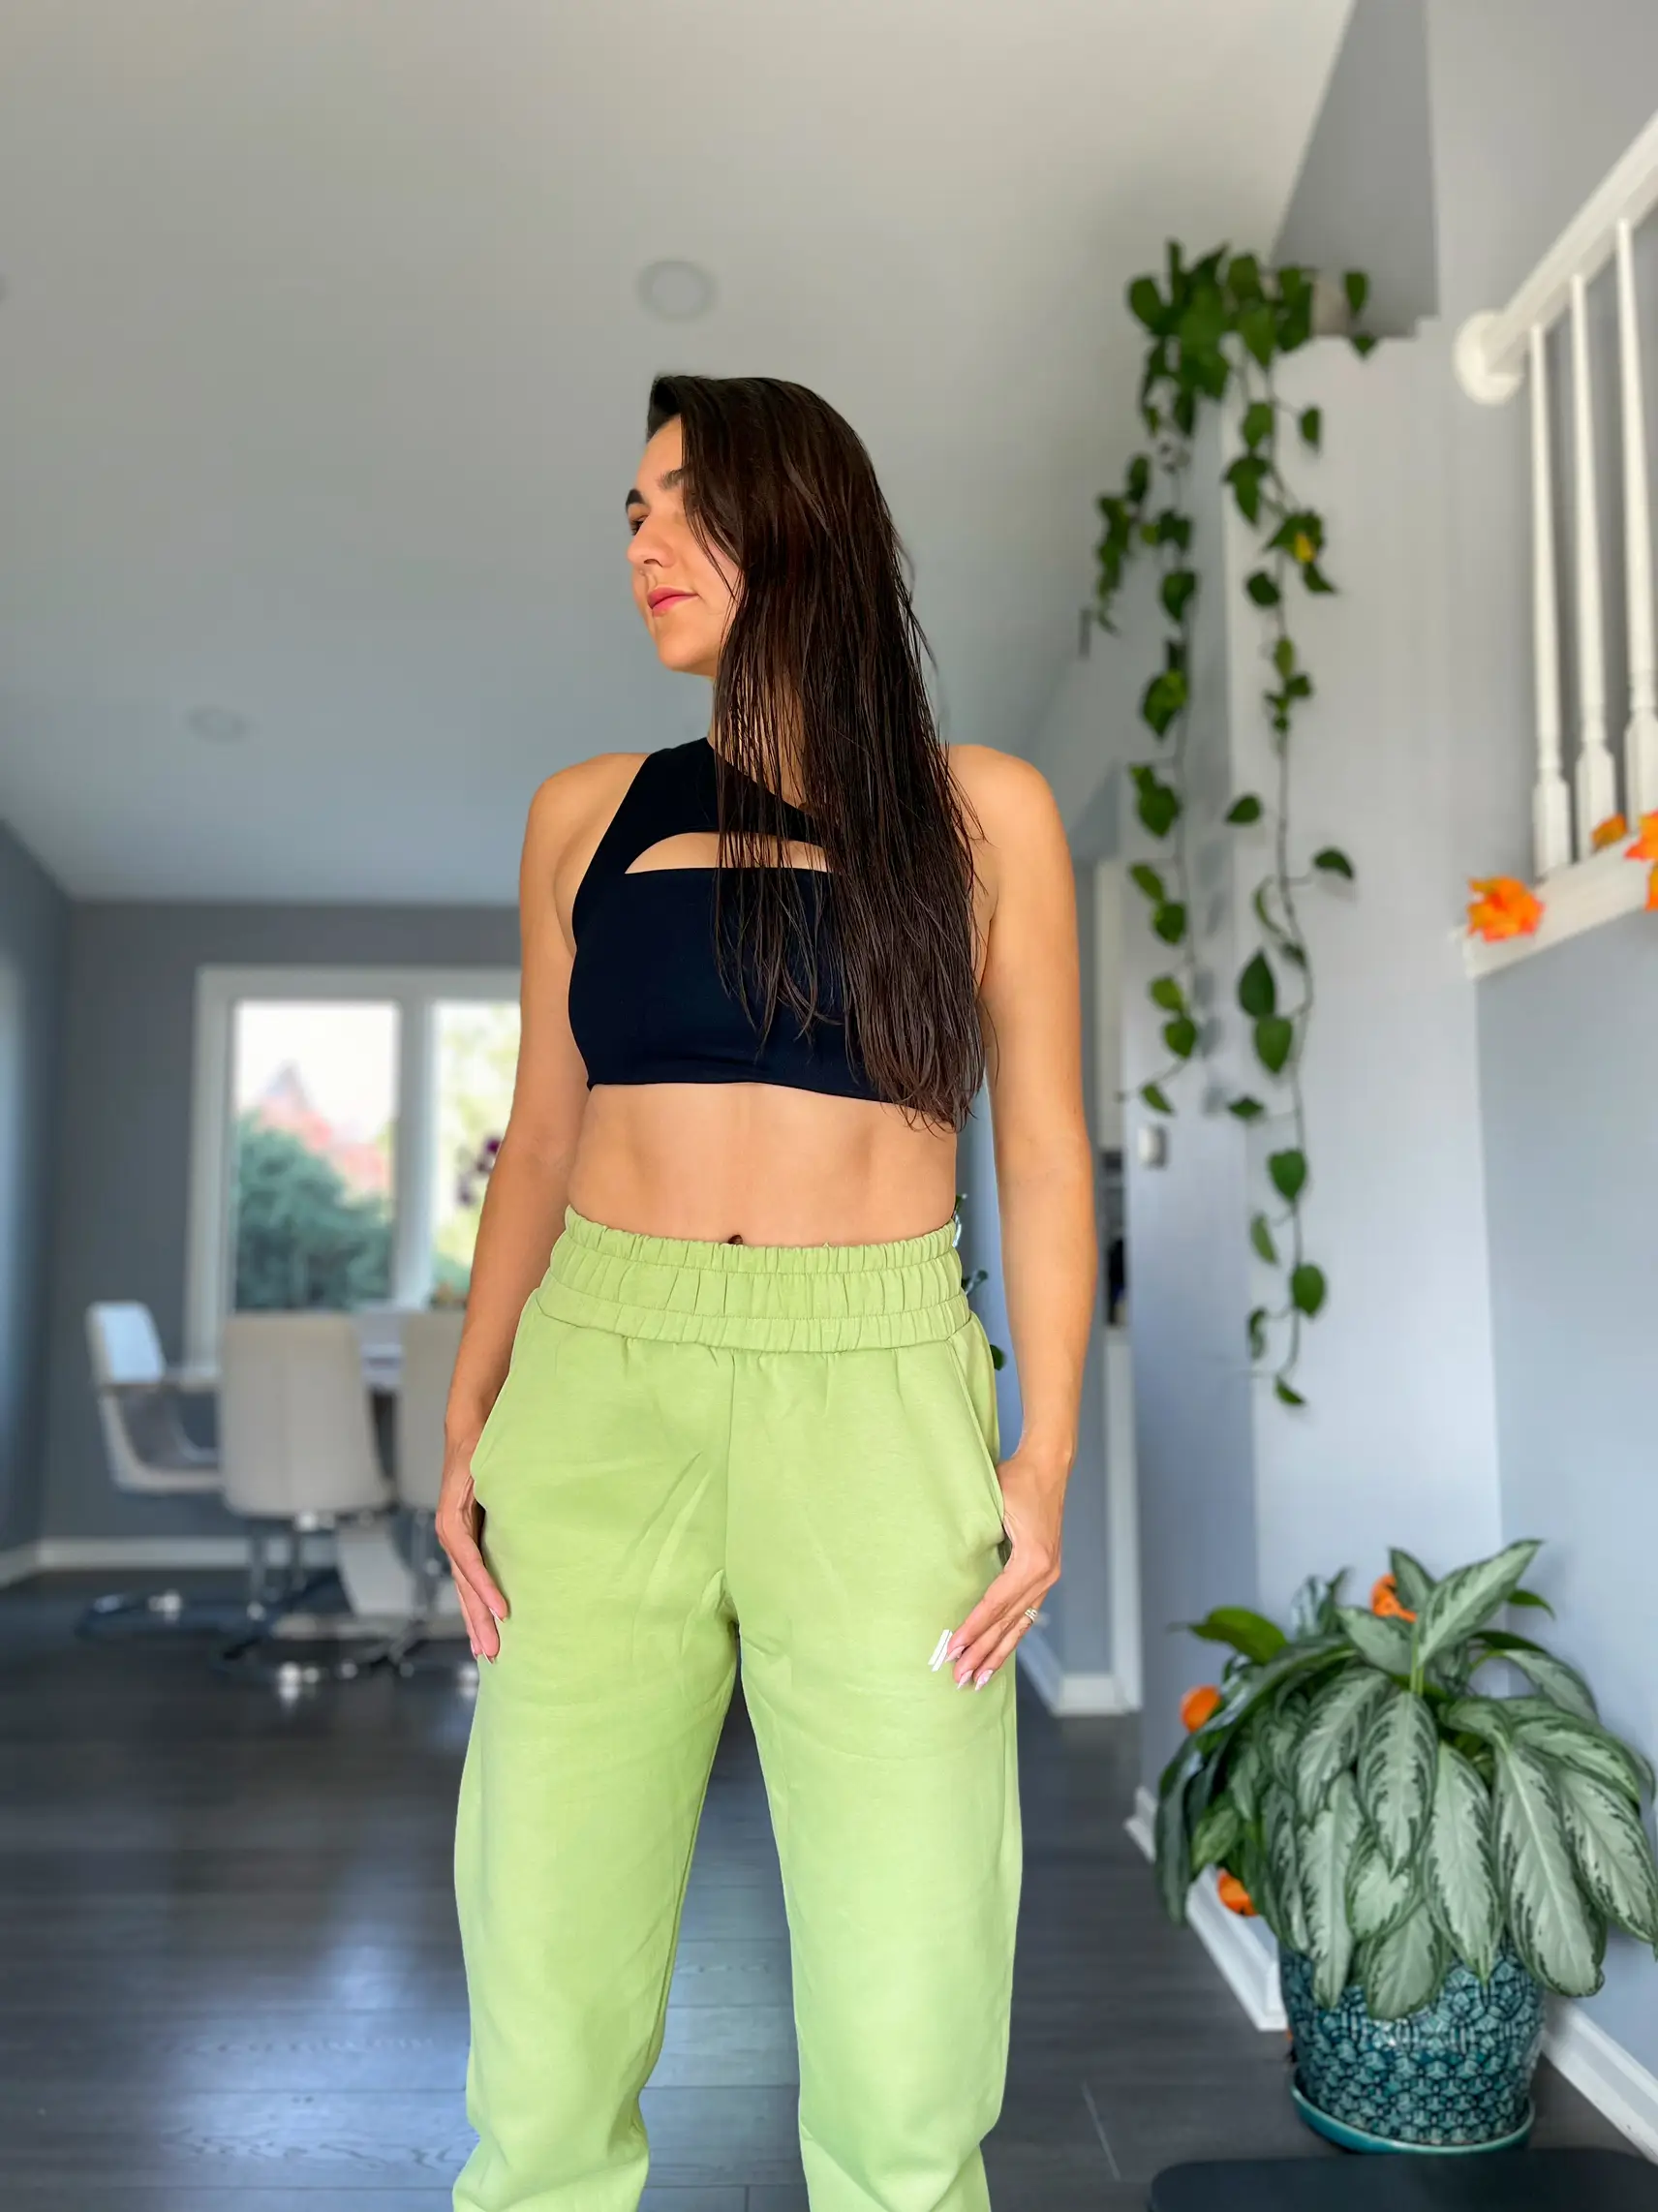 Workout Clothes Review, Gallery posted by Its.RosaJordana